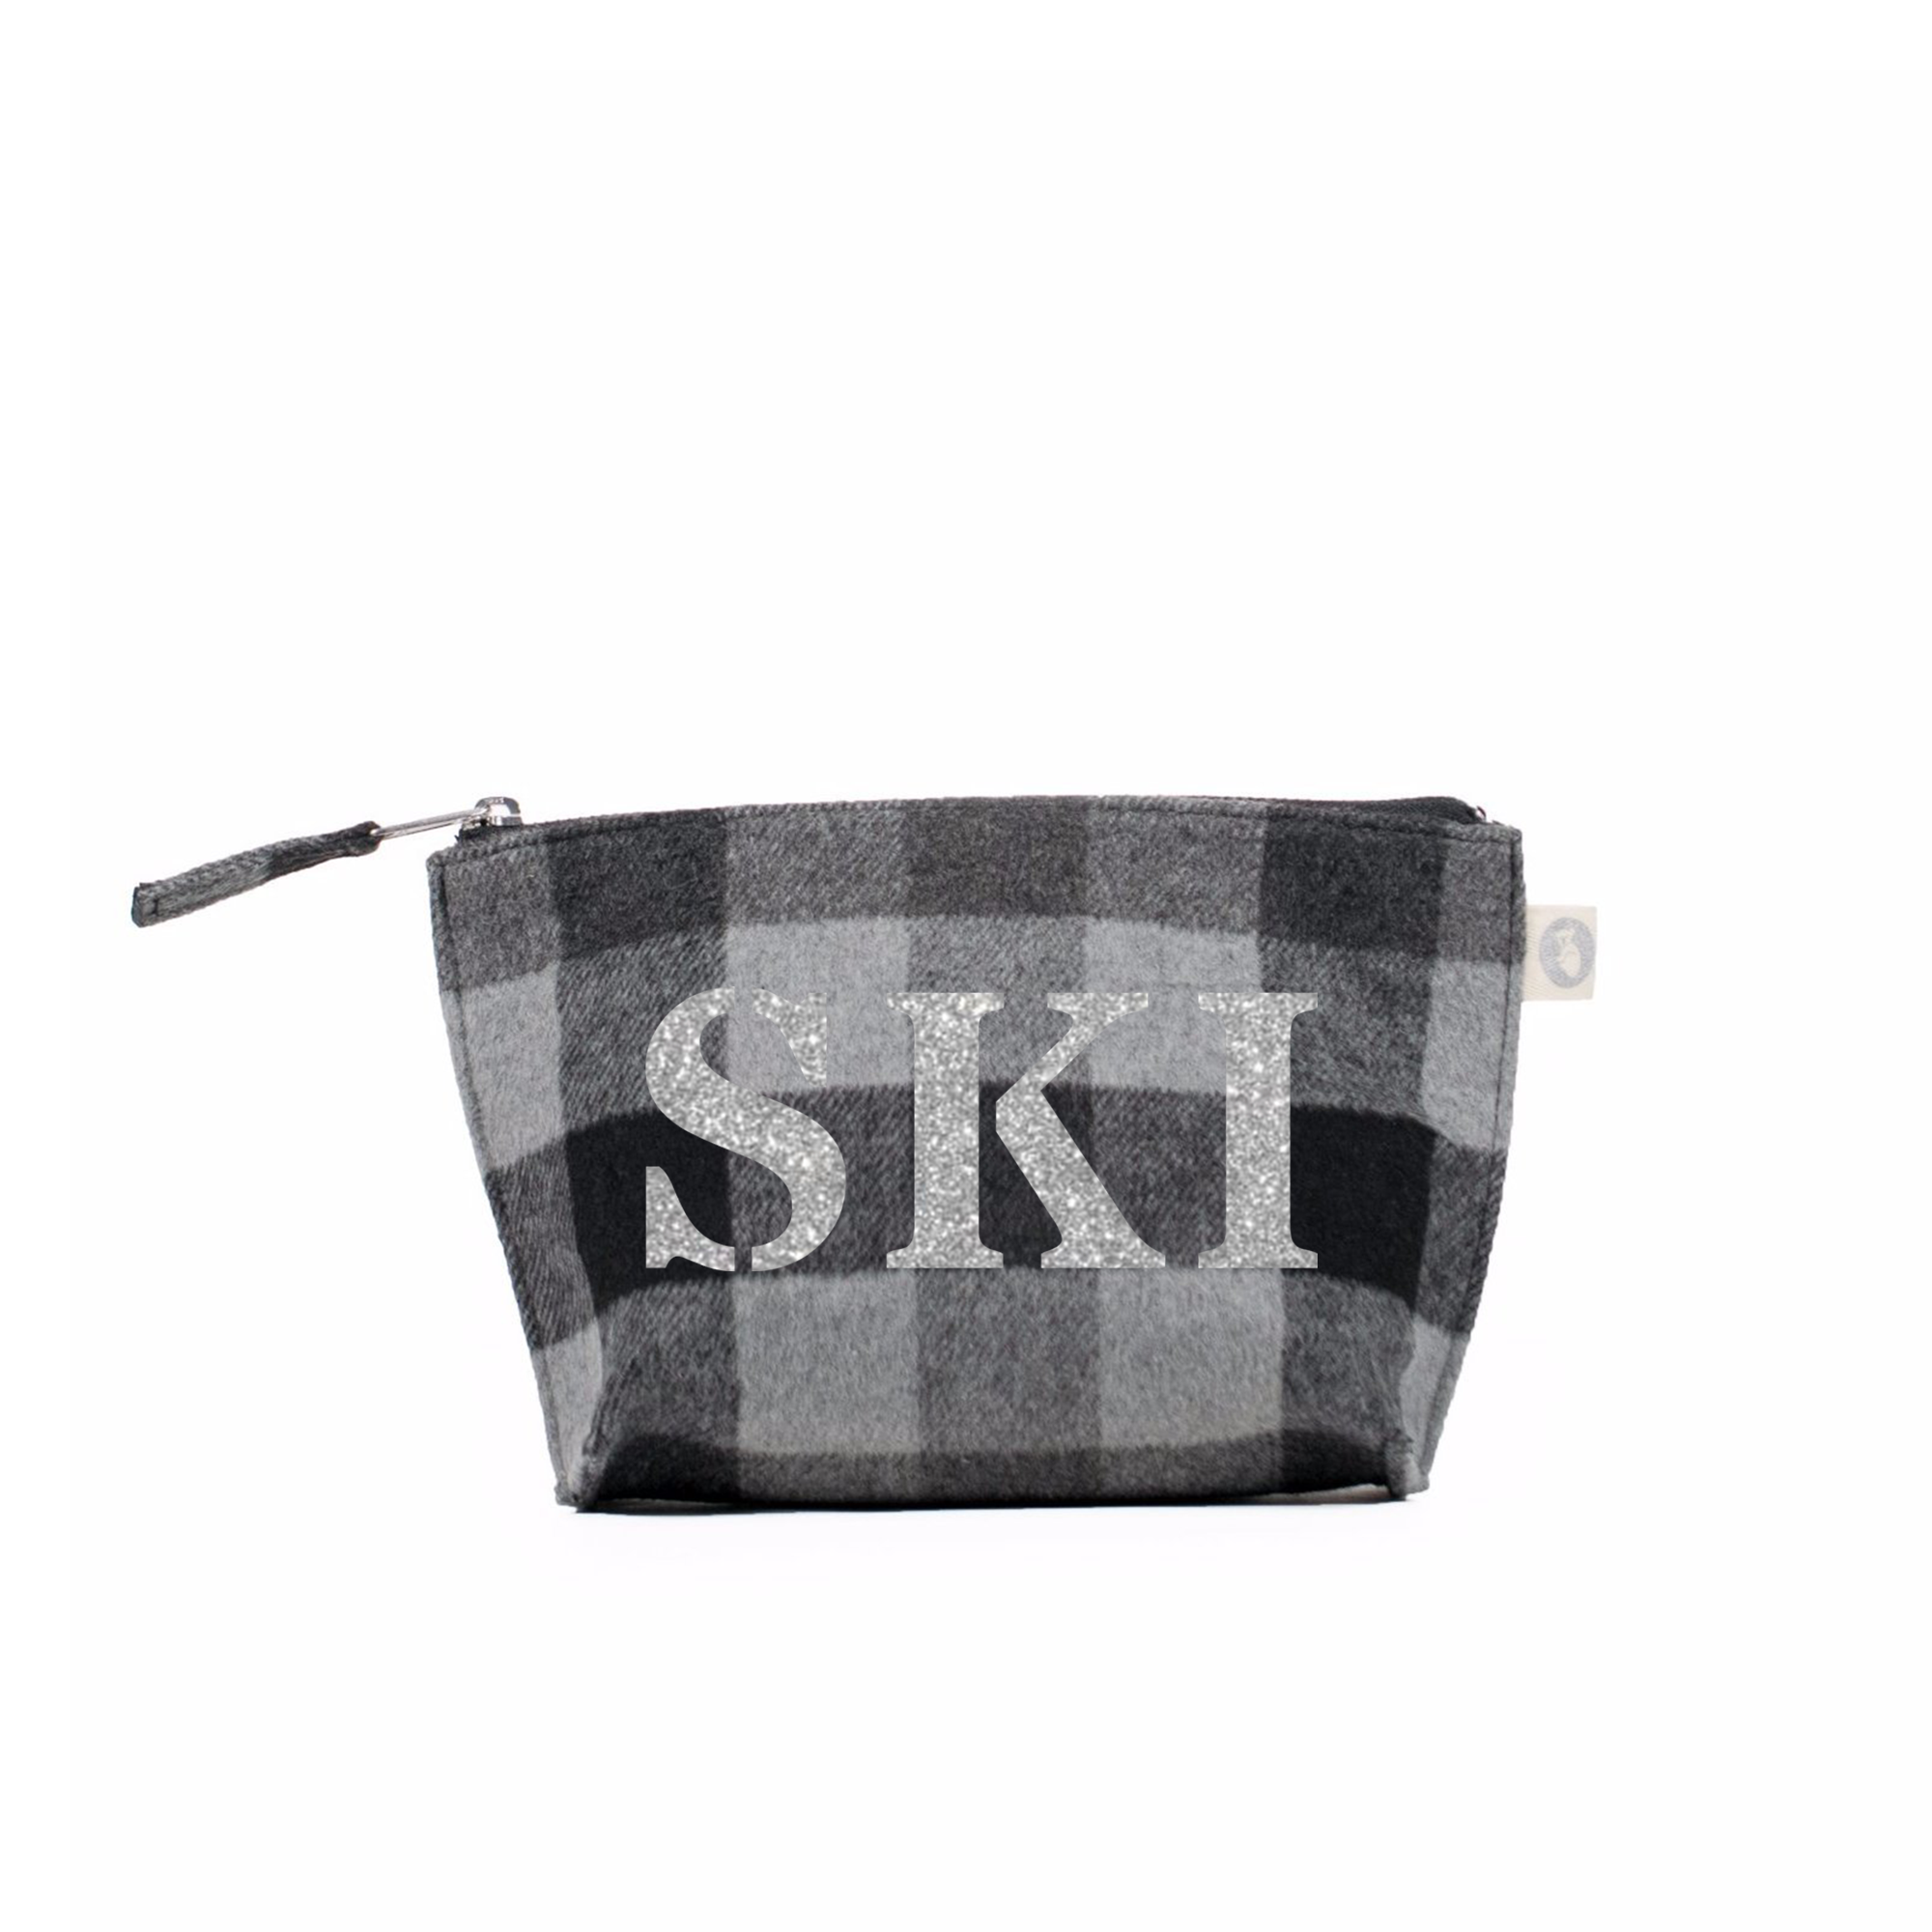 SKI Collection: Makeup Bag Grey Flannel Plaid with Silver SKI – Quilted  Koala